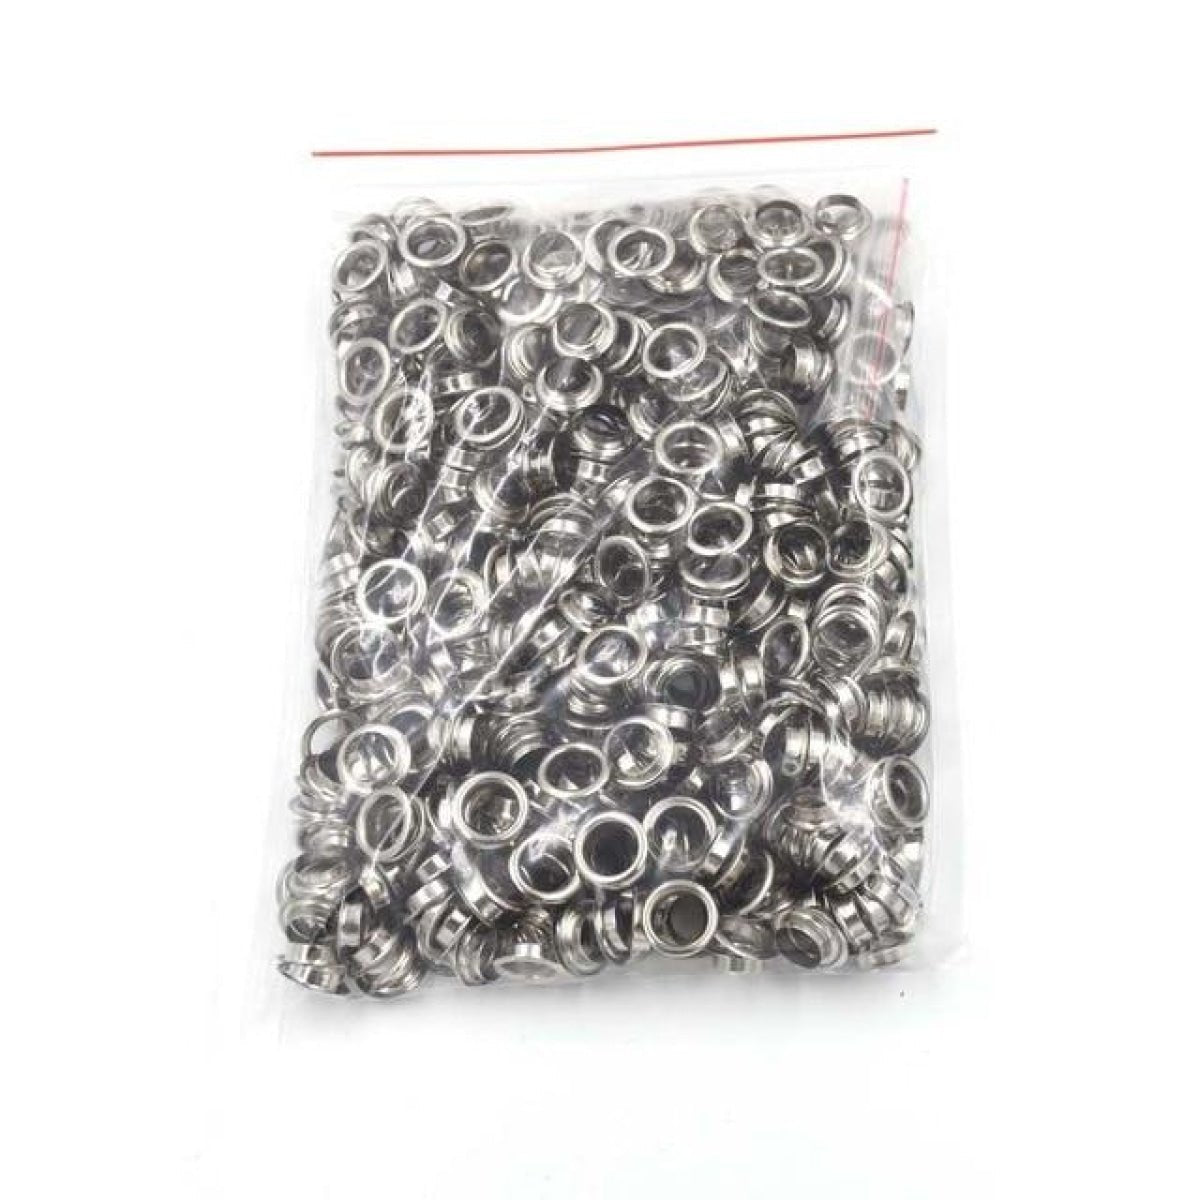 20pcs 10mm 12mm 14mm 17mm 20mm Eyelets Rivets Metal Buttonholes Buckle Clothing Buttons Bronze Chrome Gold Silver Grey Gun Metal Craft - 10mm Silver - - Asia Sell